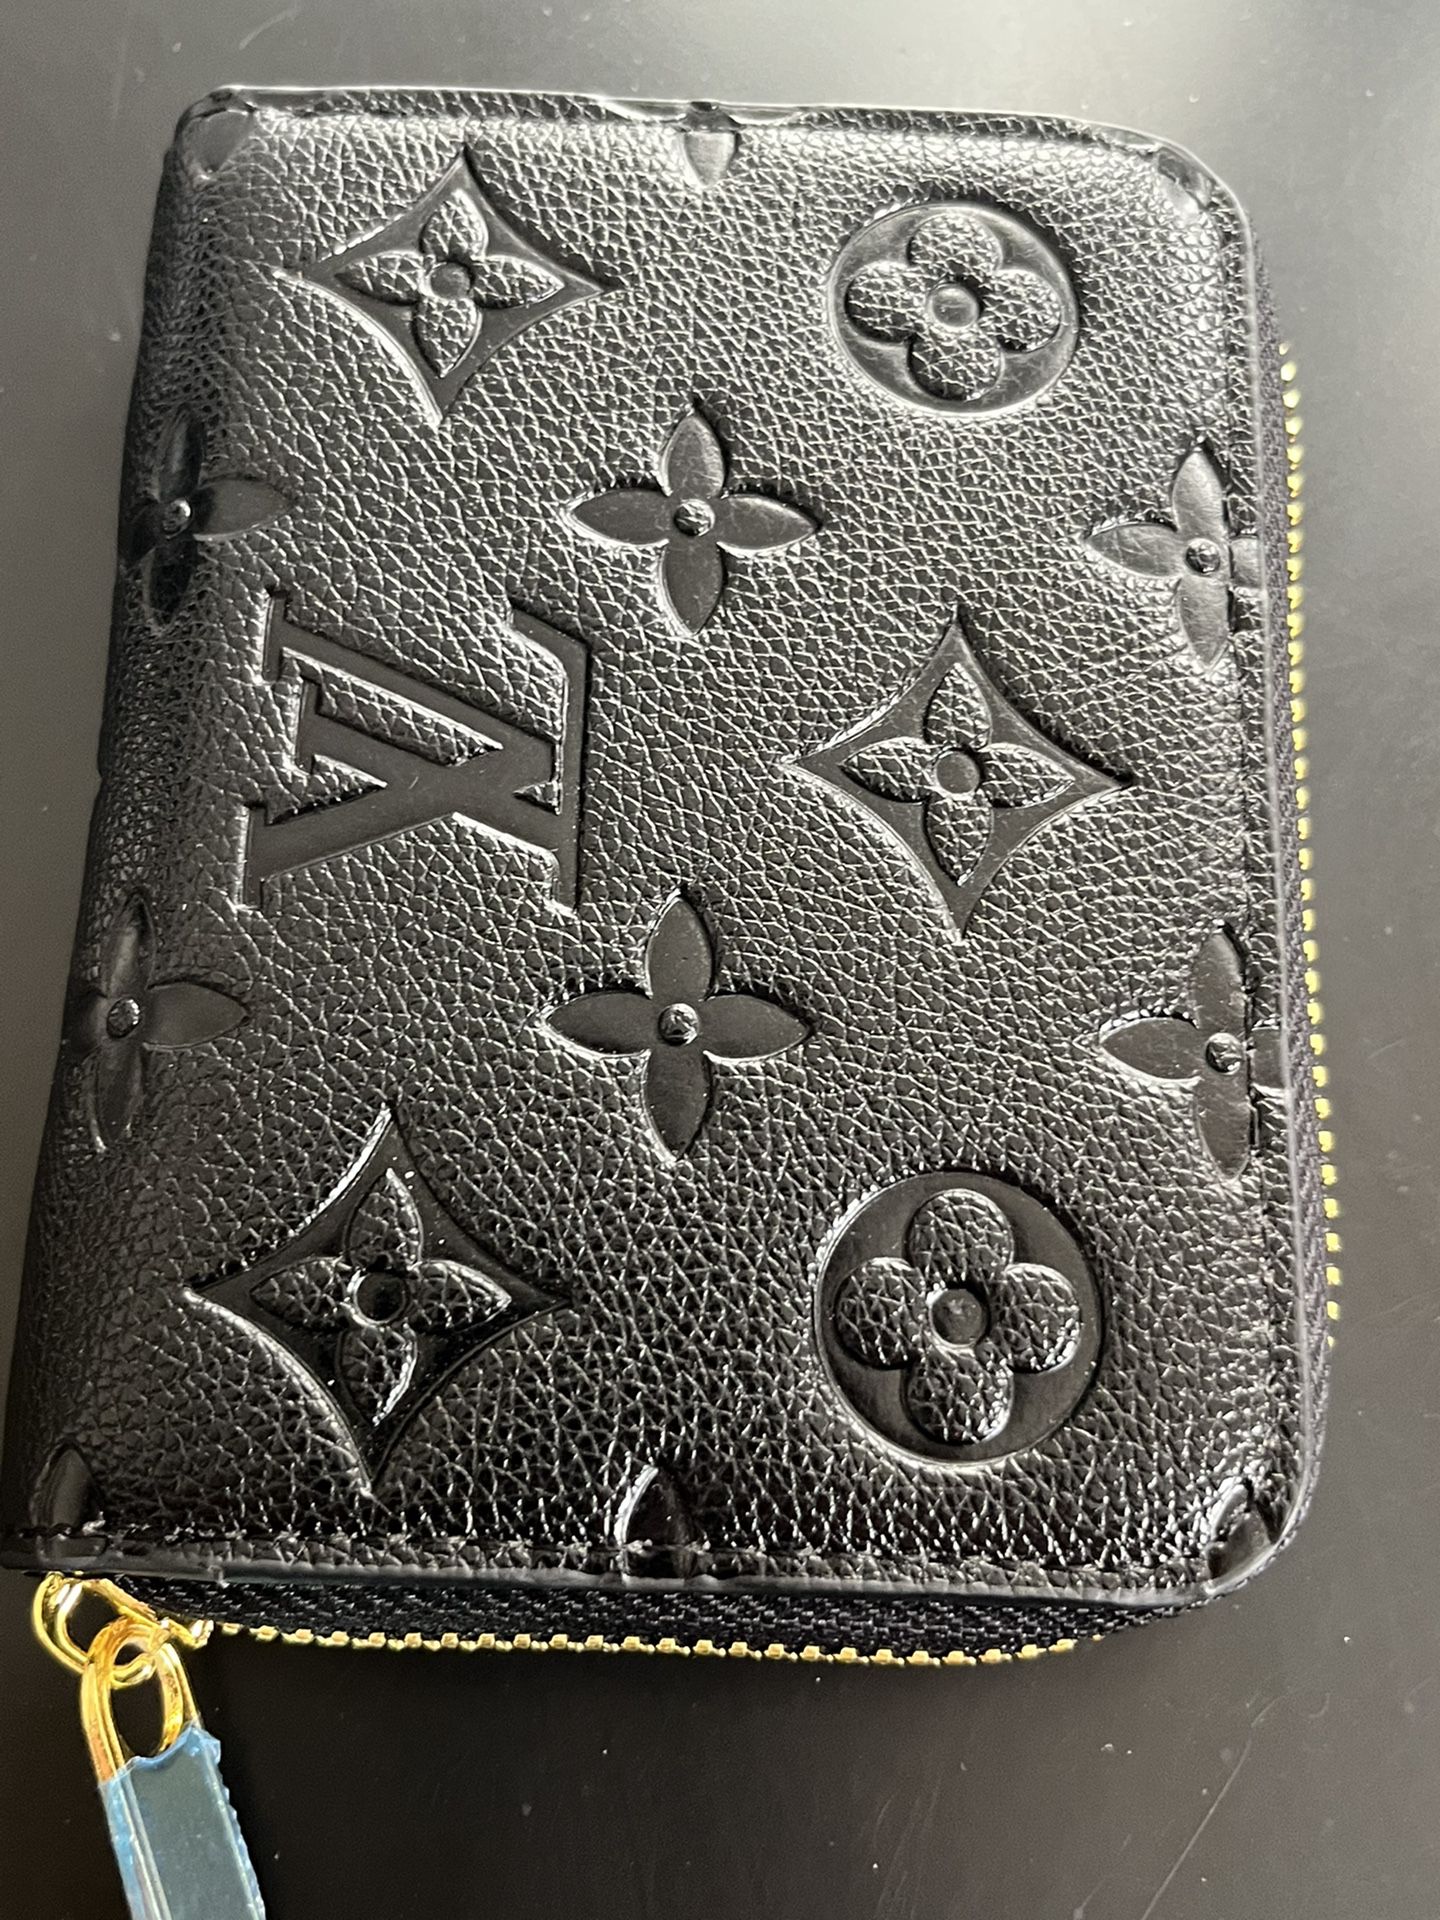 Louis Vuitton Wallet Mens Authentic for Sale in Valley Stream, NY - OfferUp